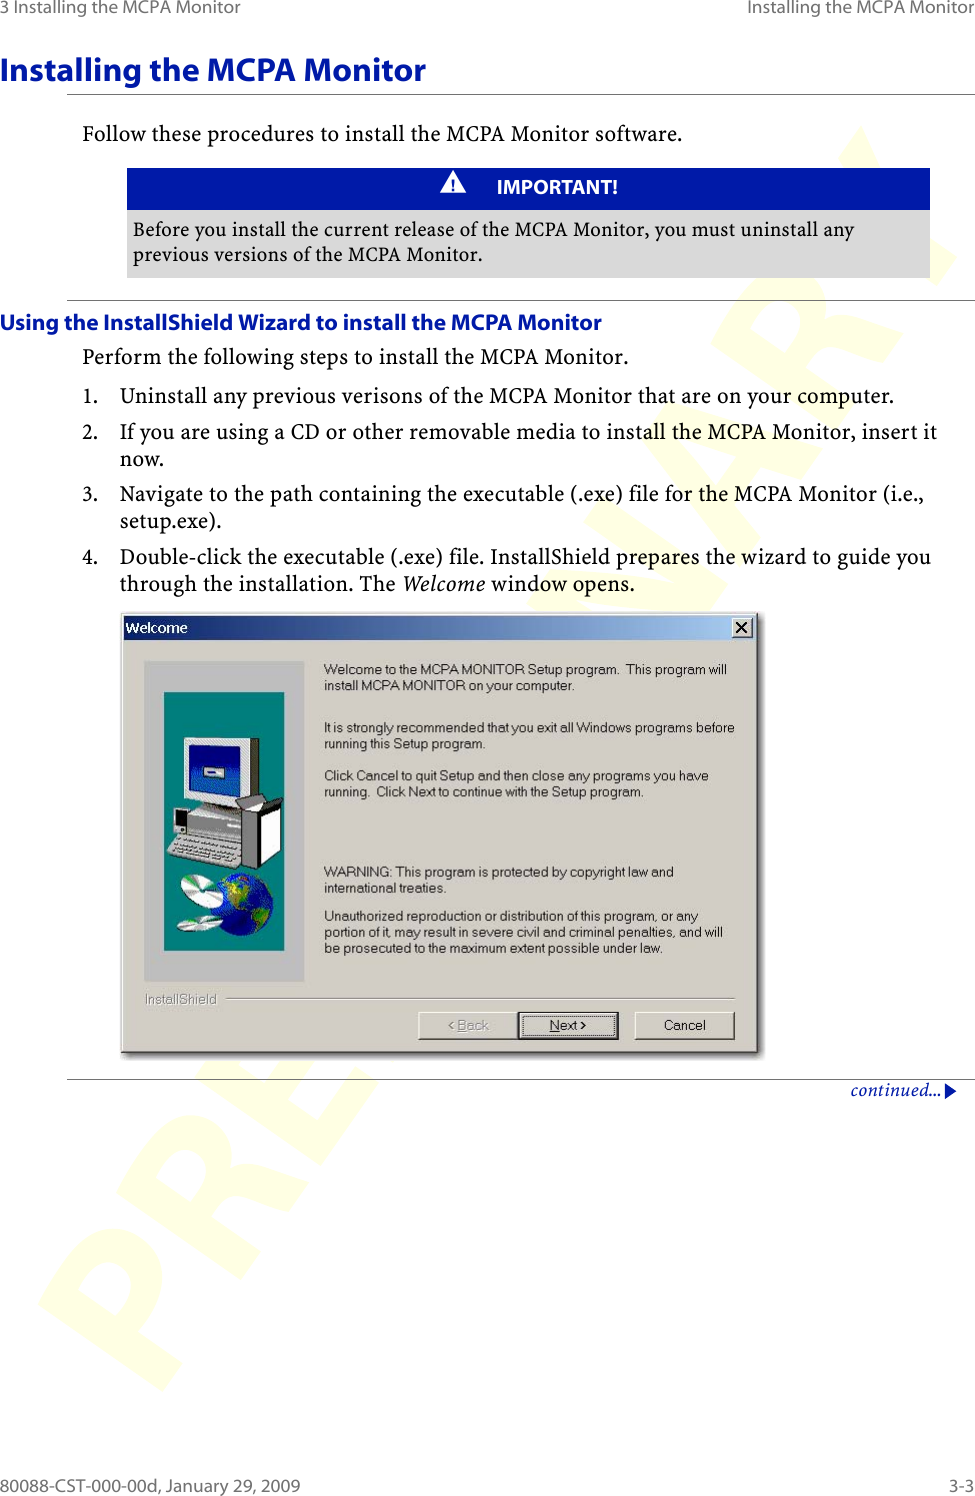 3 Installing the MCPA Monitor Installing the MCPA Monitor80088-CST-000-00d, January 29, 2009 3-3Installing the MCPA MonitorFollow these procedures to install the MCPA Monitor software.Using the InstallShield Wizard to install the MCPA MonitorPerform the following steps to install the MCPA Monitor.1. Uninstall any previous verisons of the MCPA Monitor that are on your computer.2. If you are using a CD or other removable media to install the MCPA Monitor, insert it now.3. Navigate to the path containing the executable (.exe) file for the MCPA Monitor (i.e., setup.exe).4. Double-click the executable (.exe) file. InstallShield prepares the wizard to guide you through the installation. The Welcome window opens.continued...IMPORTANT!Before you install the current release of the MCPA Monitor, you must uninstall any previous versions of the MCPA Monitor.